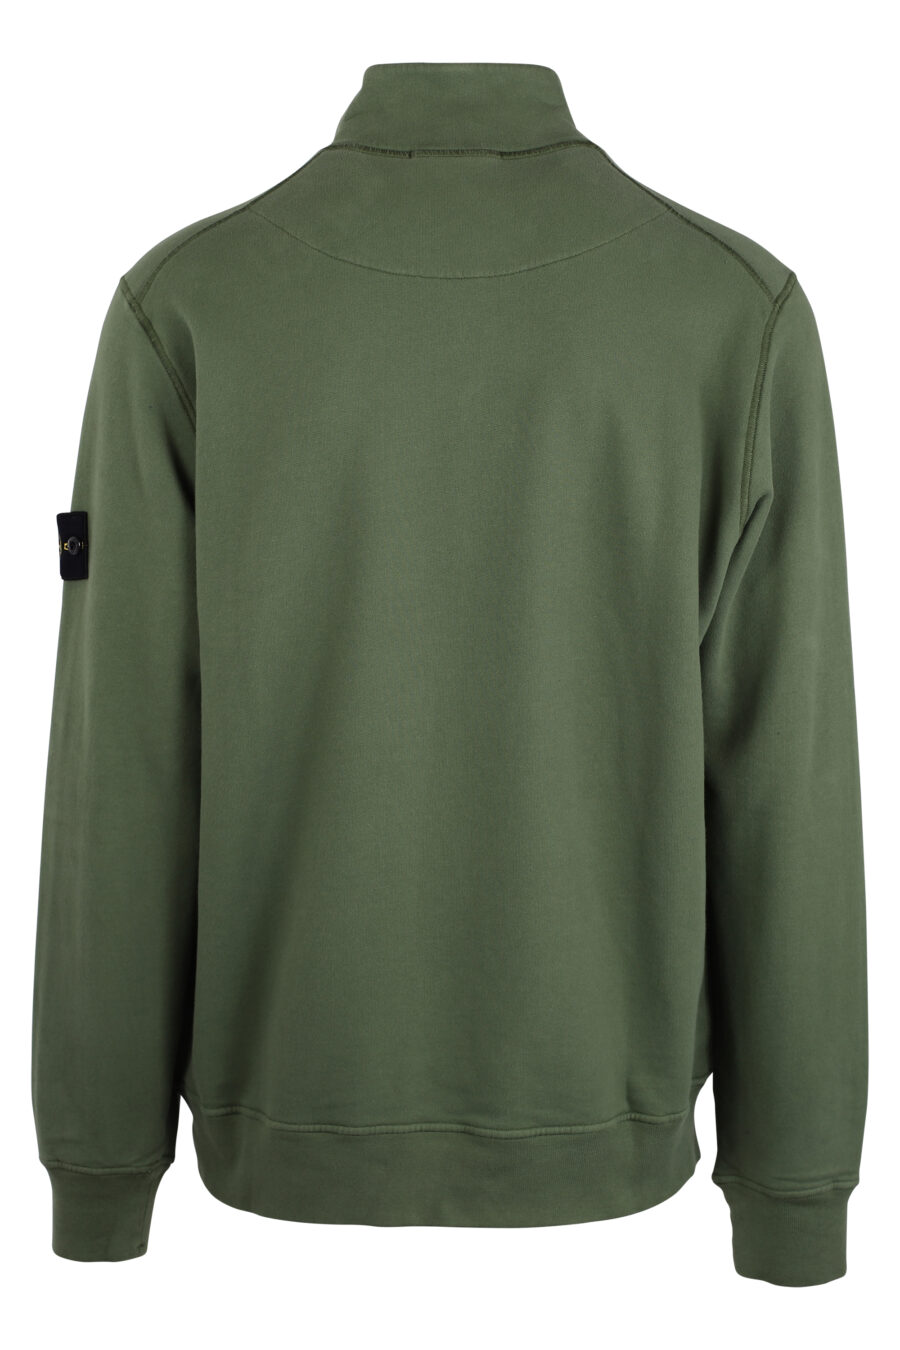 Military green sweatshirt with short zip and patch - IMG 4352